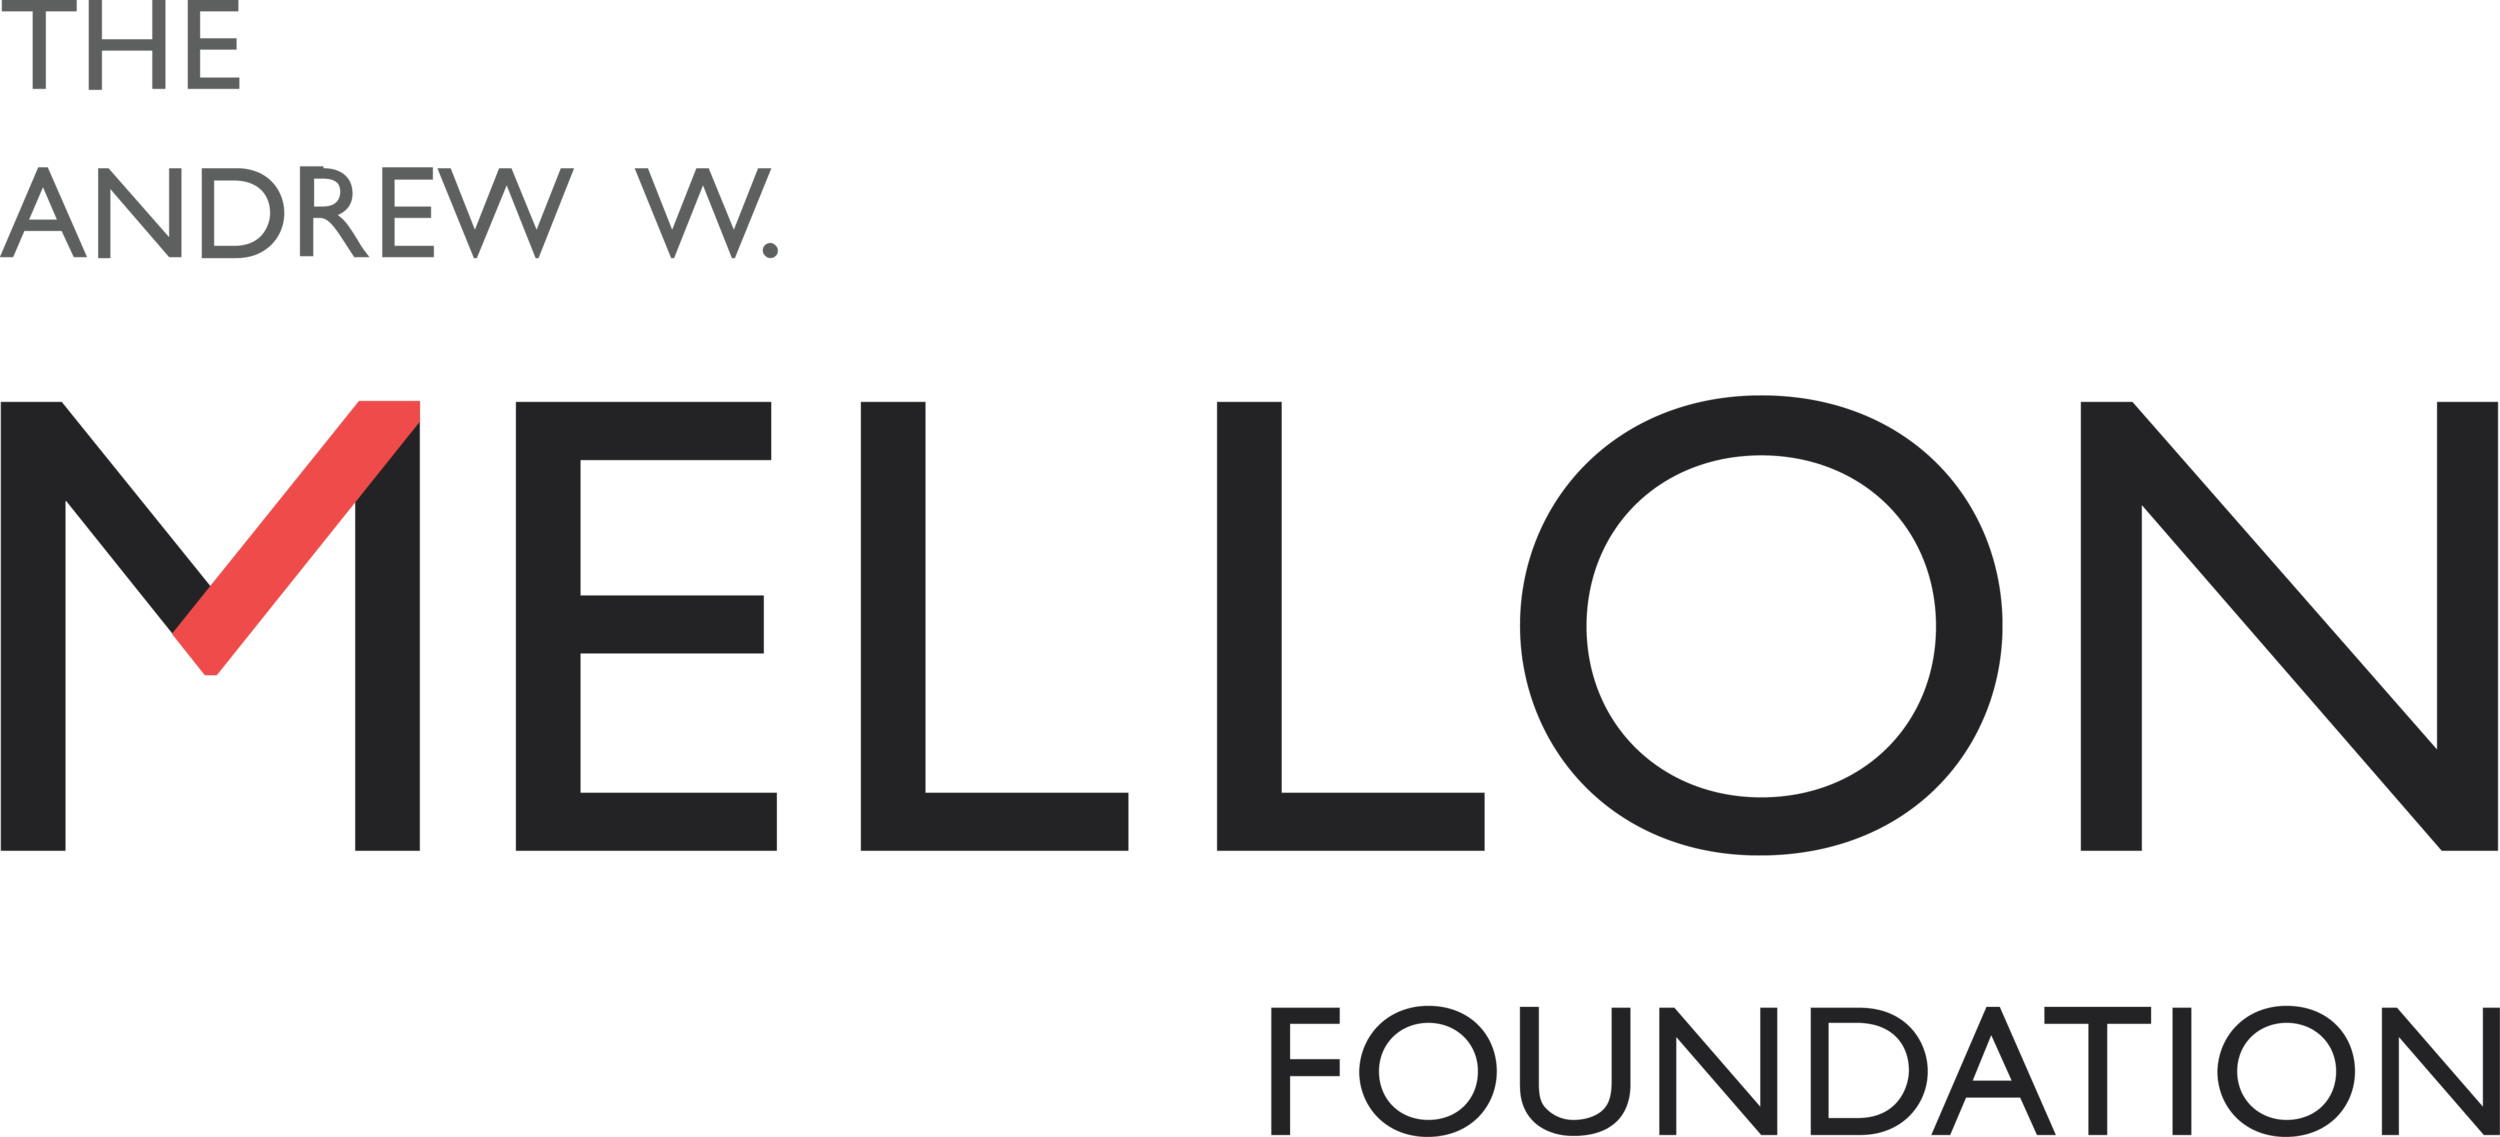 The-Andrew-W-Mellon-Foundation-1.png